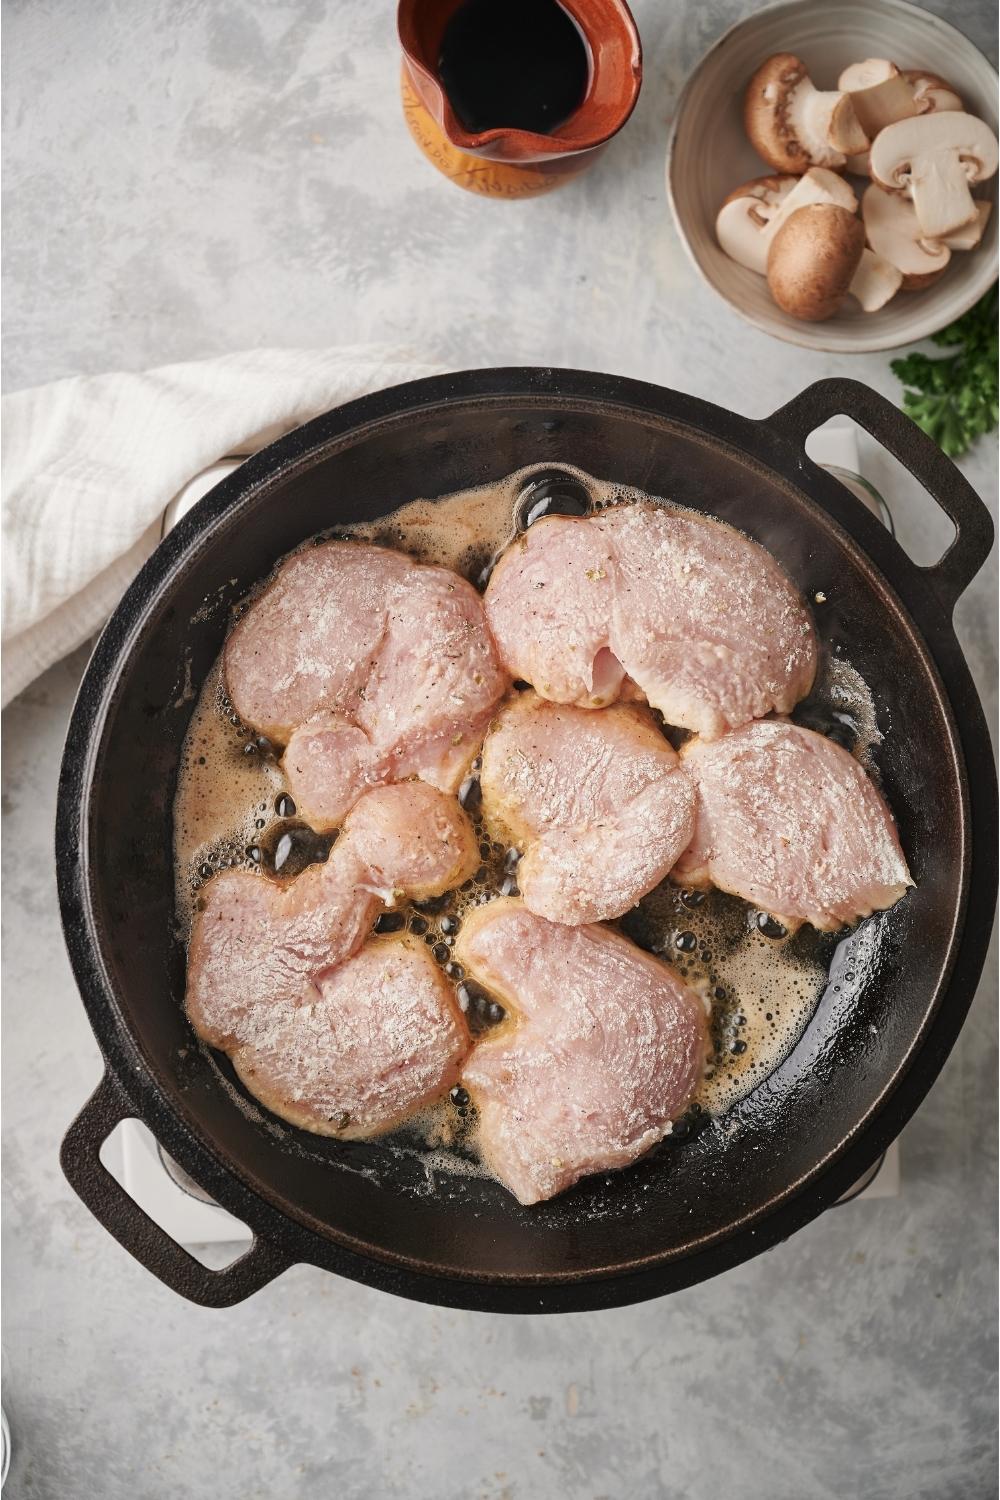 Raw chicken breast pieces covered in a flour mixture in a cast iron pan, with bubbling butter and oil and raw sliced mushrooms in a bowl next to the pan.